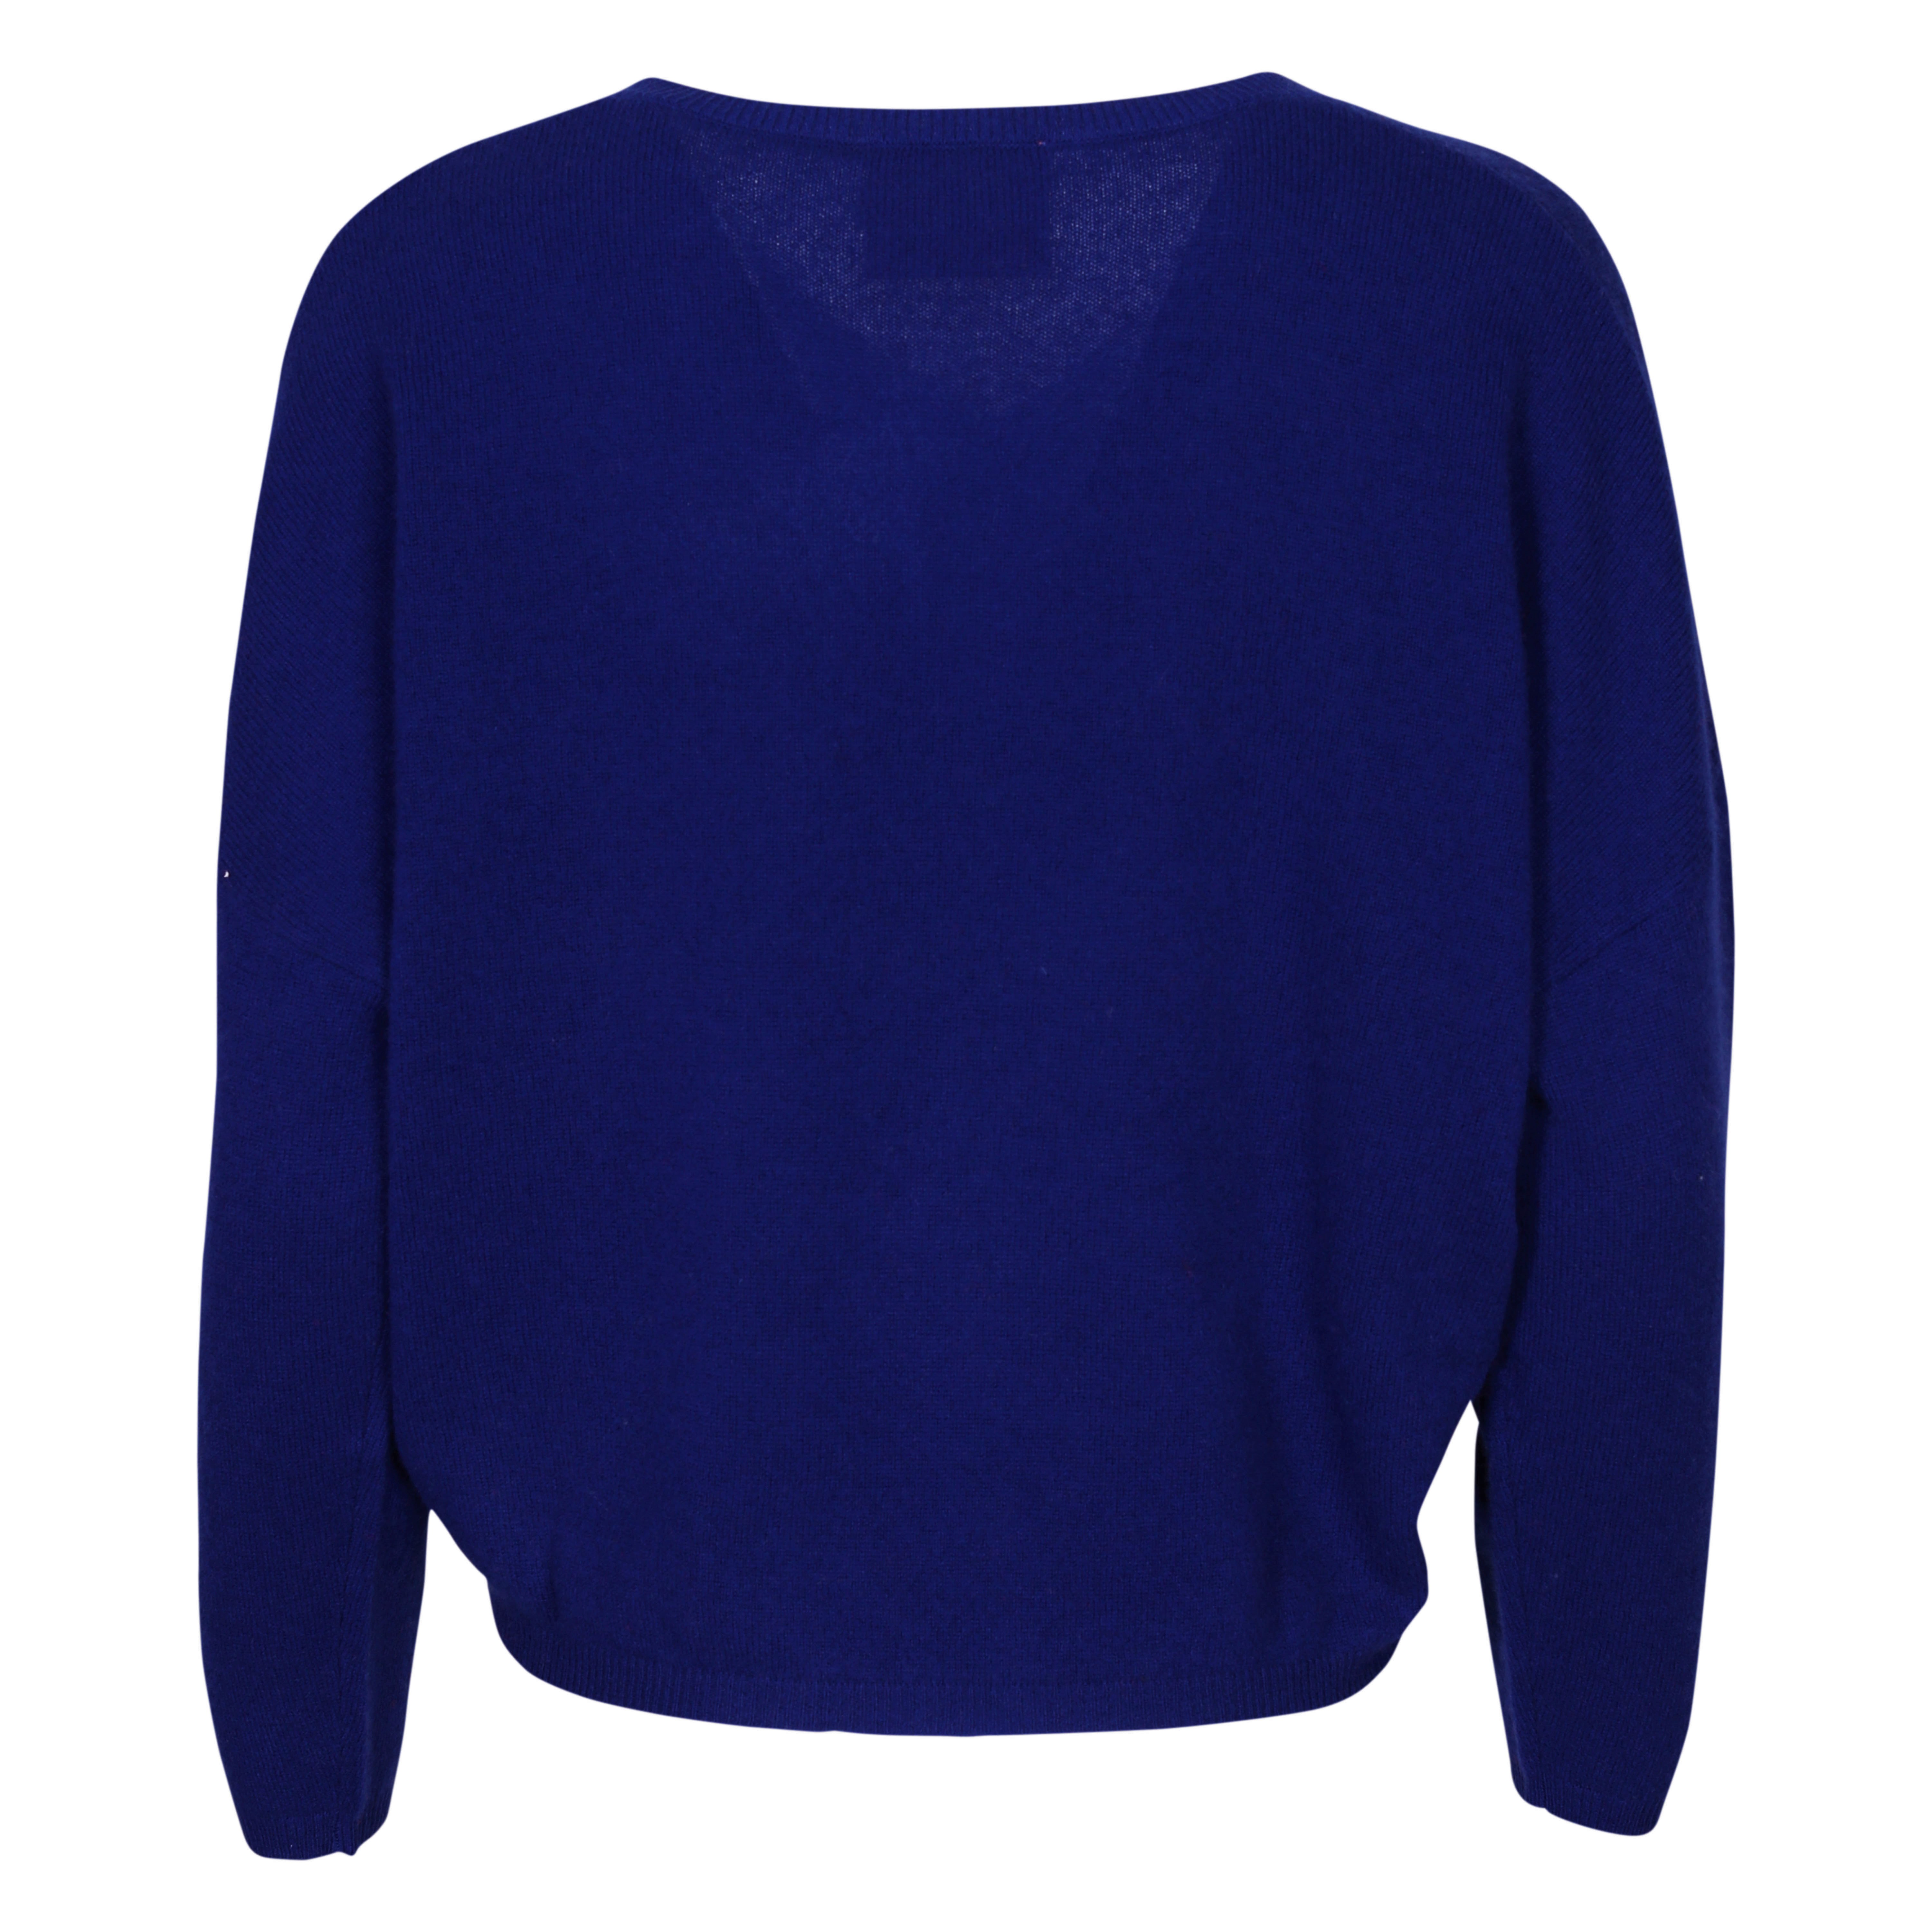 Absolut Cashmere Alicia Pullover in Outremer